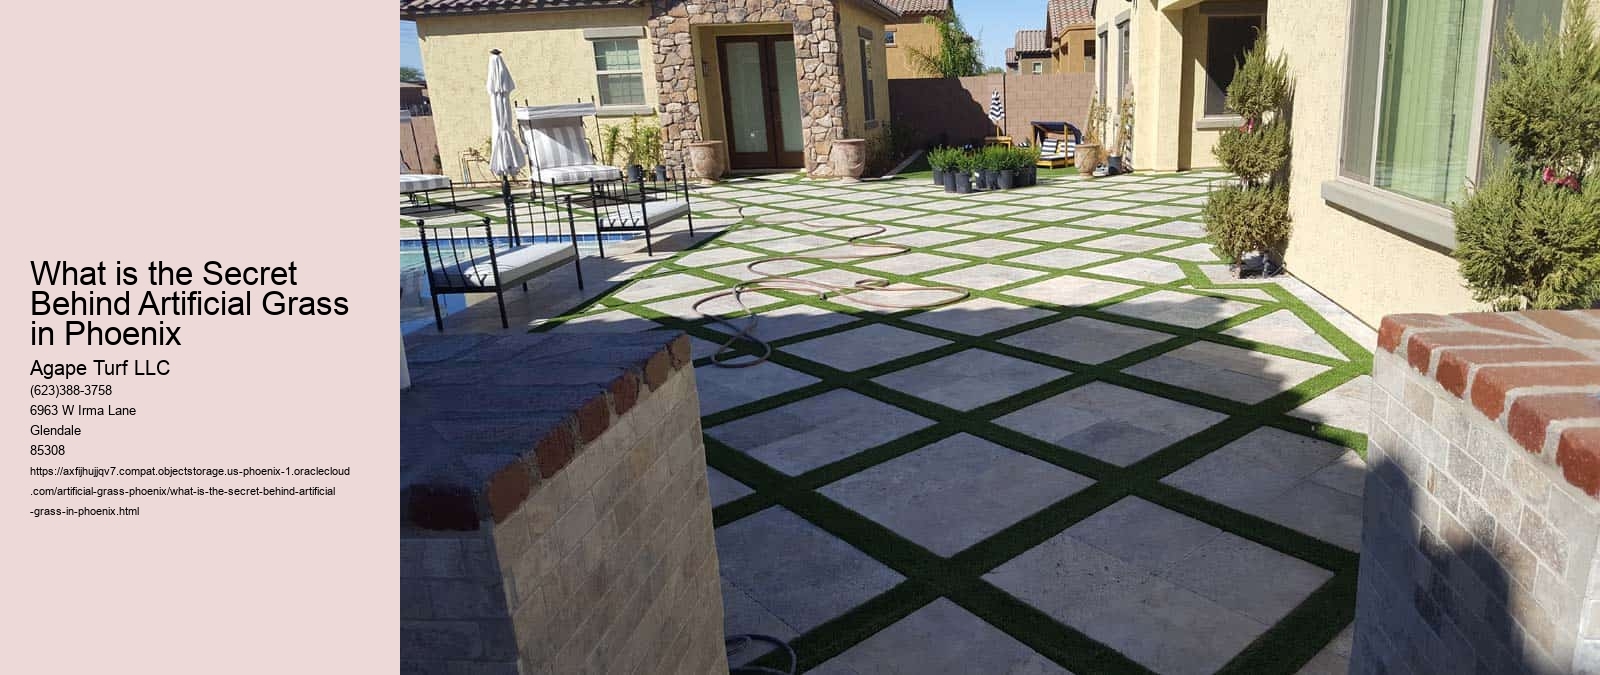 What is the Secret Behind Artificial Grass in Phoenix